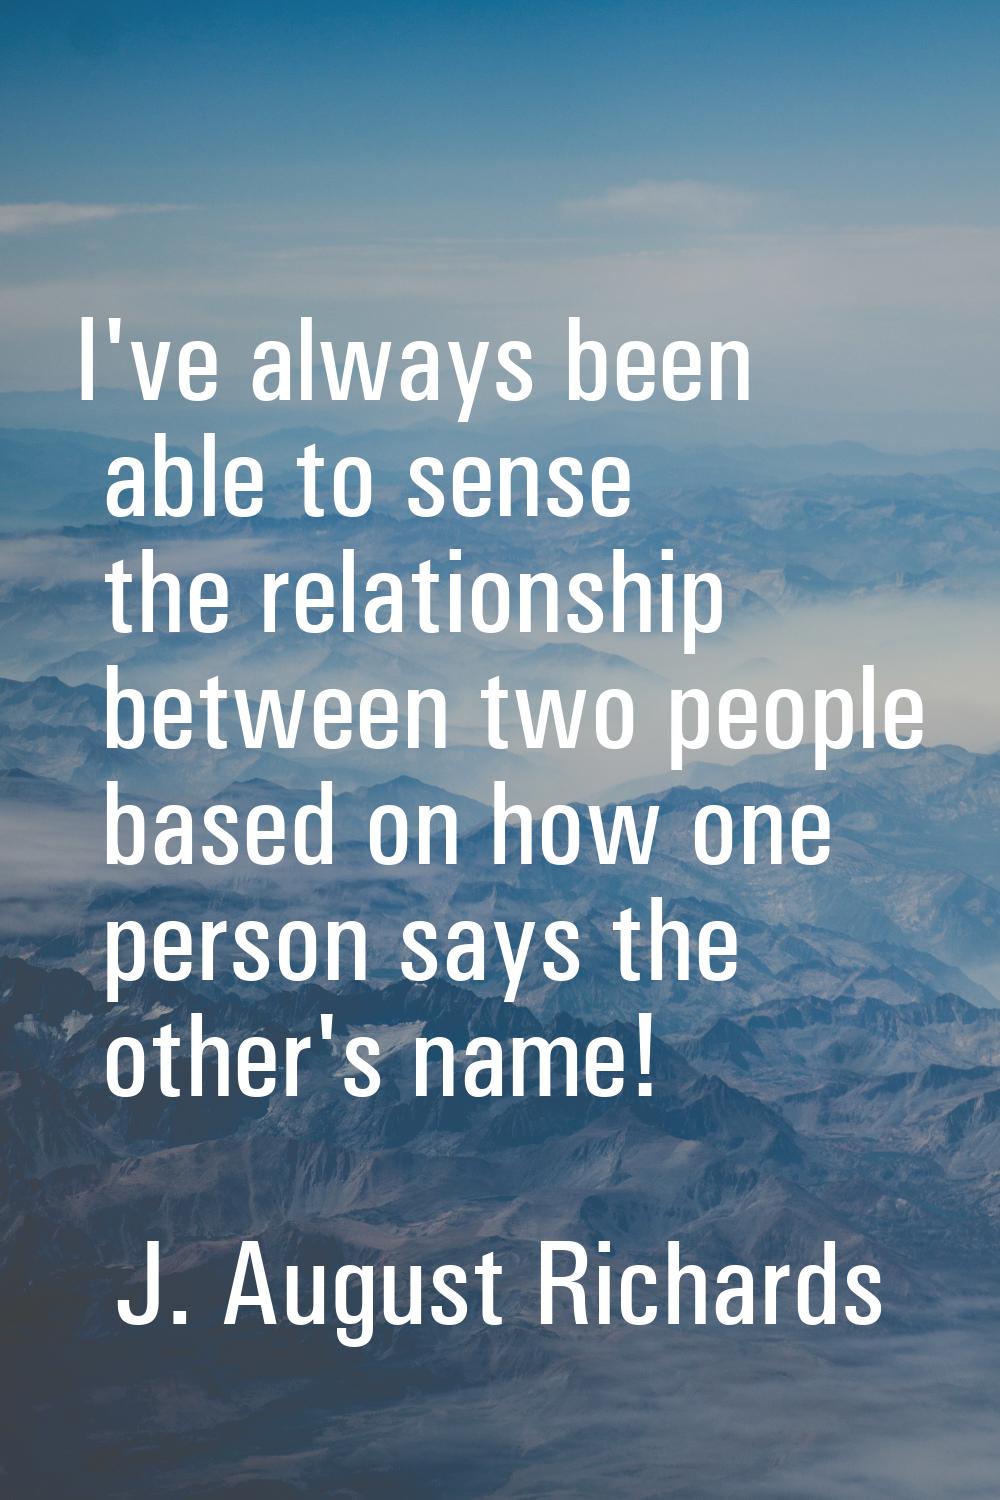 I've always been able to sense the relationship between two people based on how one person says the